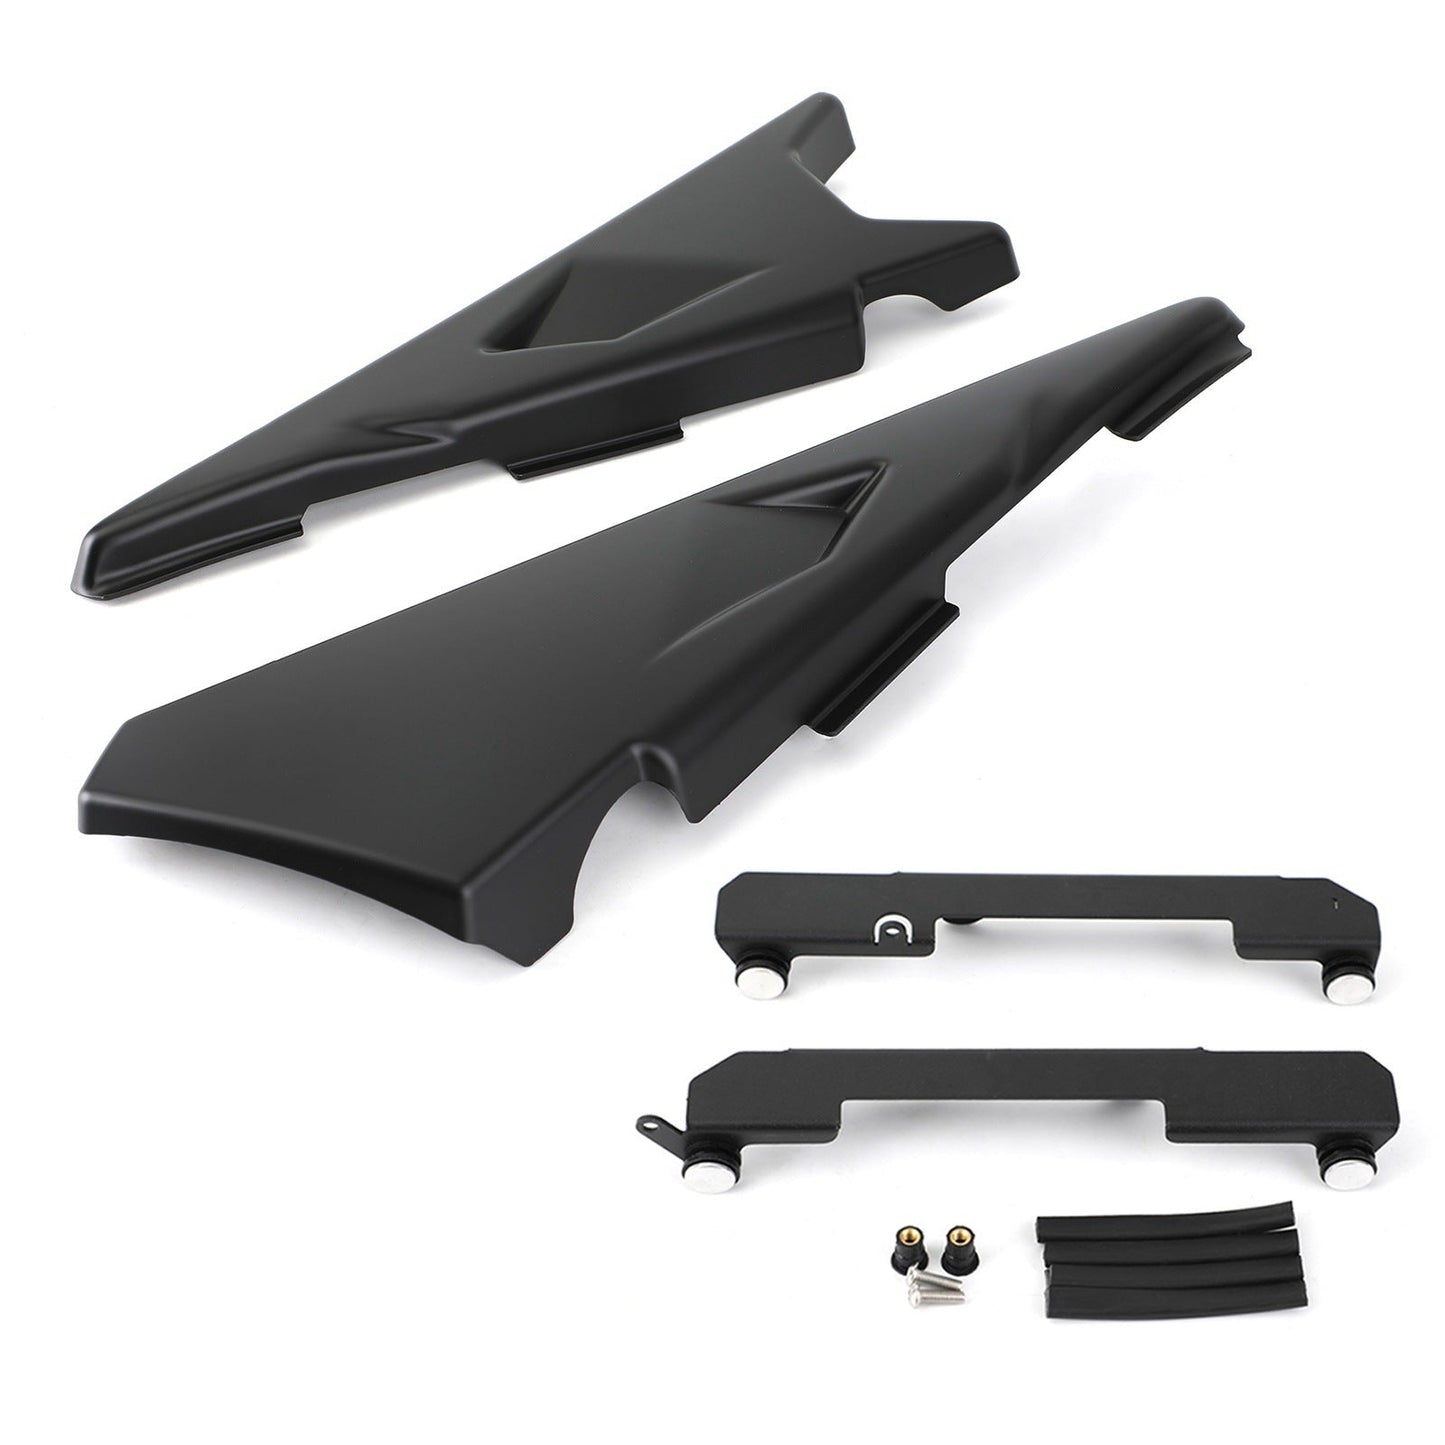 Side Infill Mid Panel Fairing Covers fit for BMW R1200GS/ADV LC R1250GS/ADV